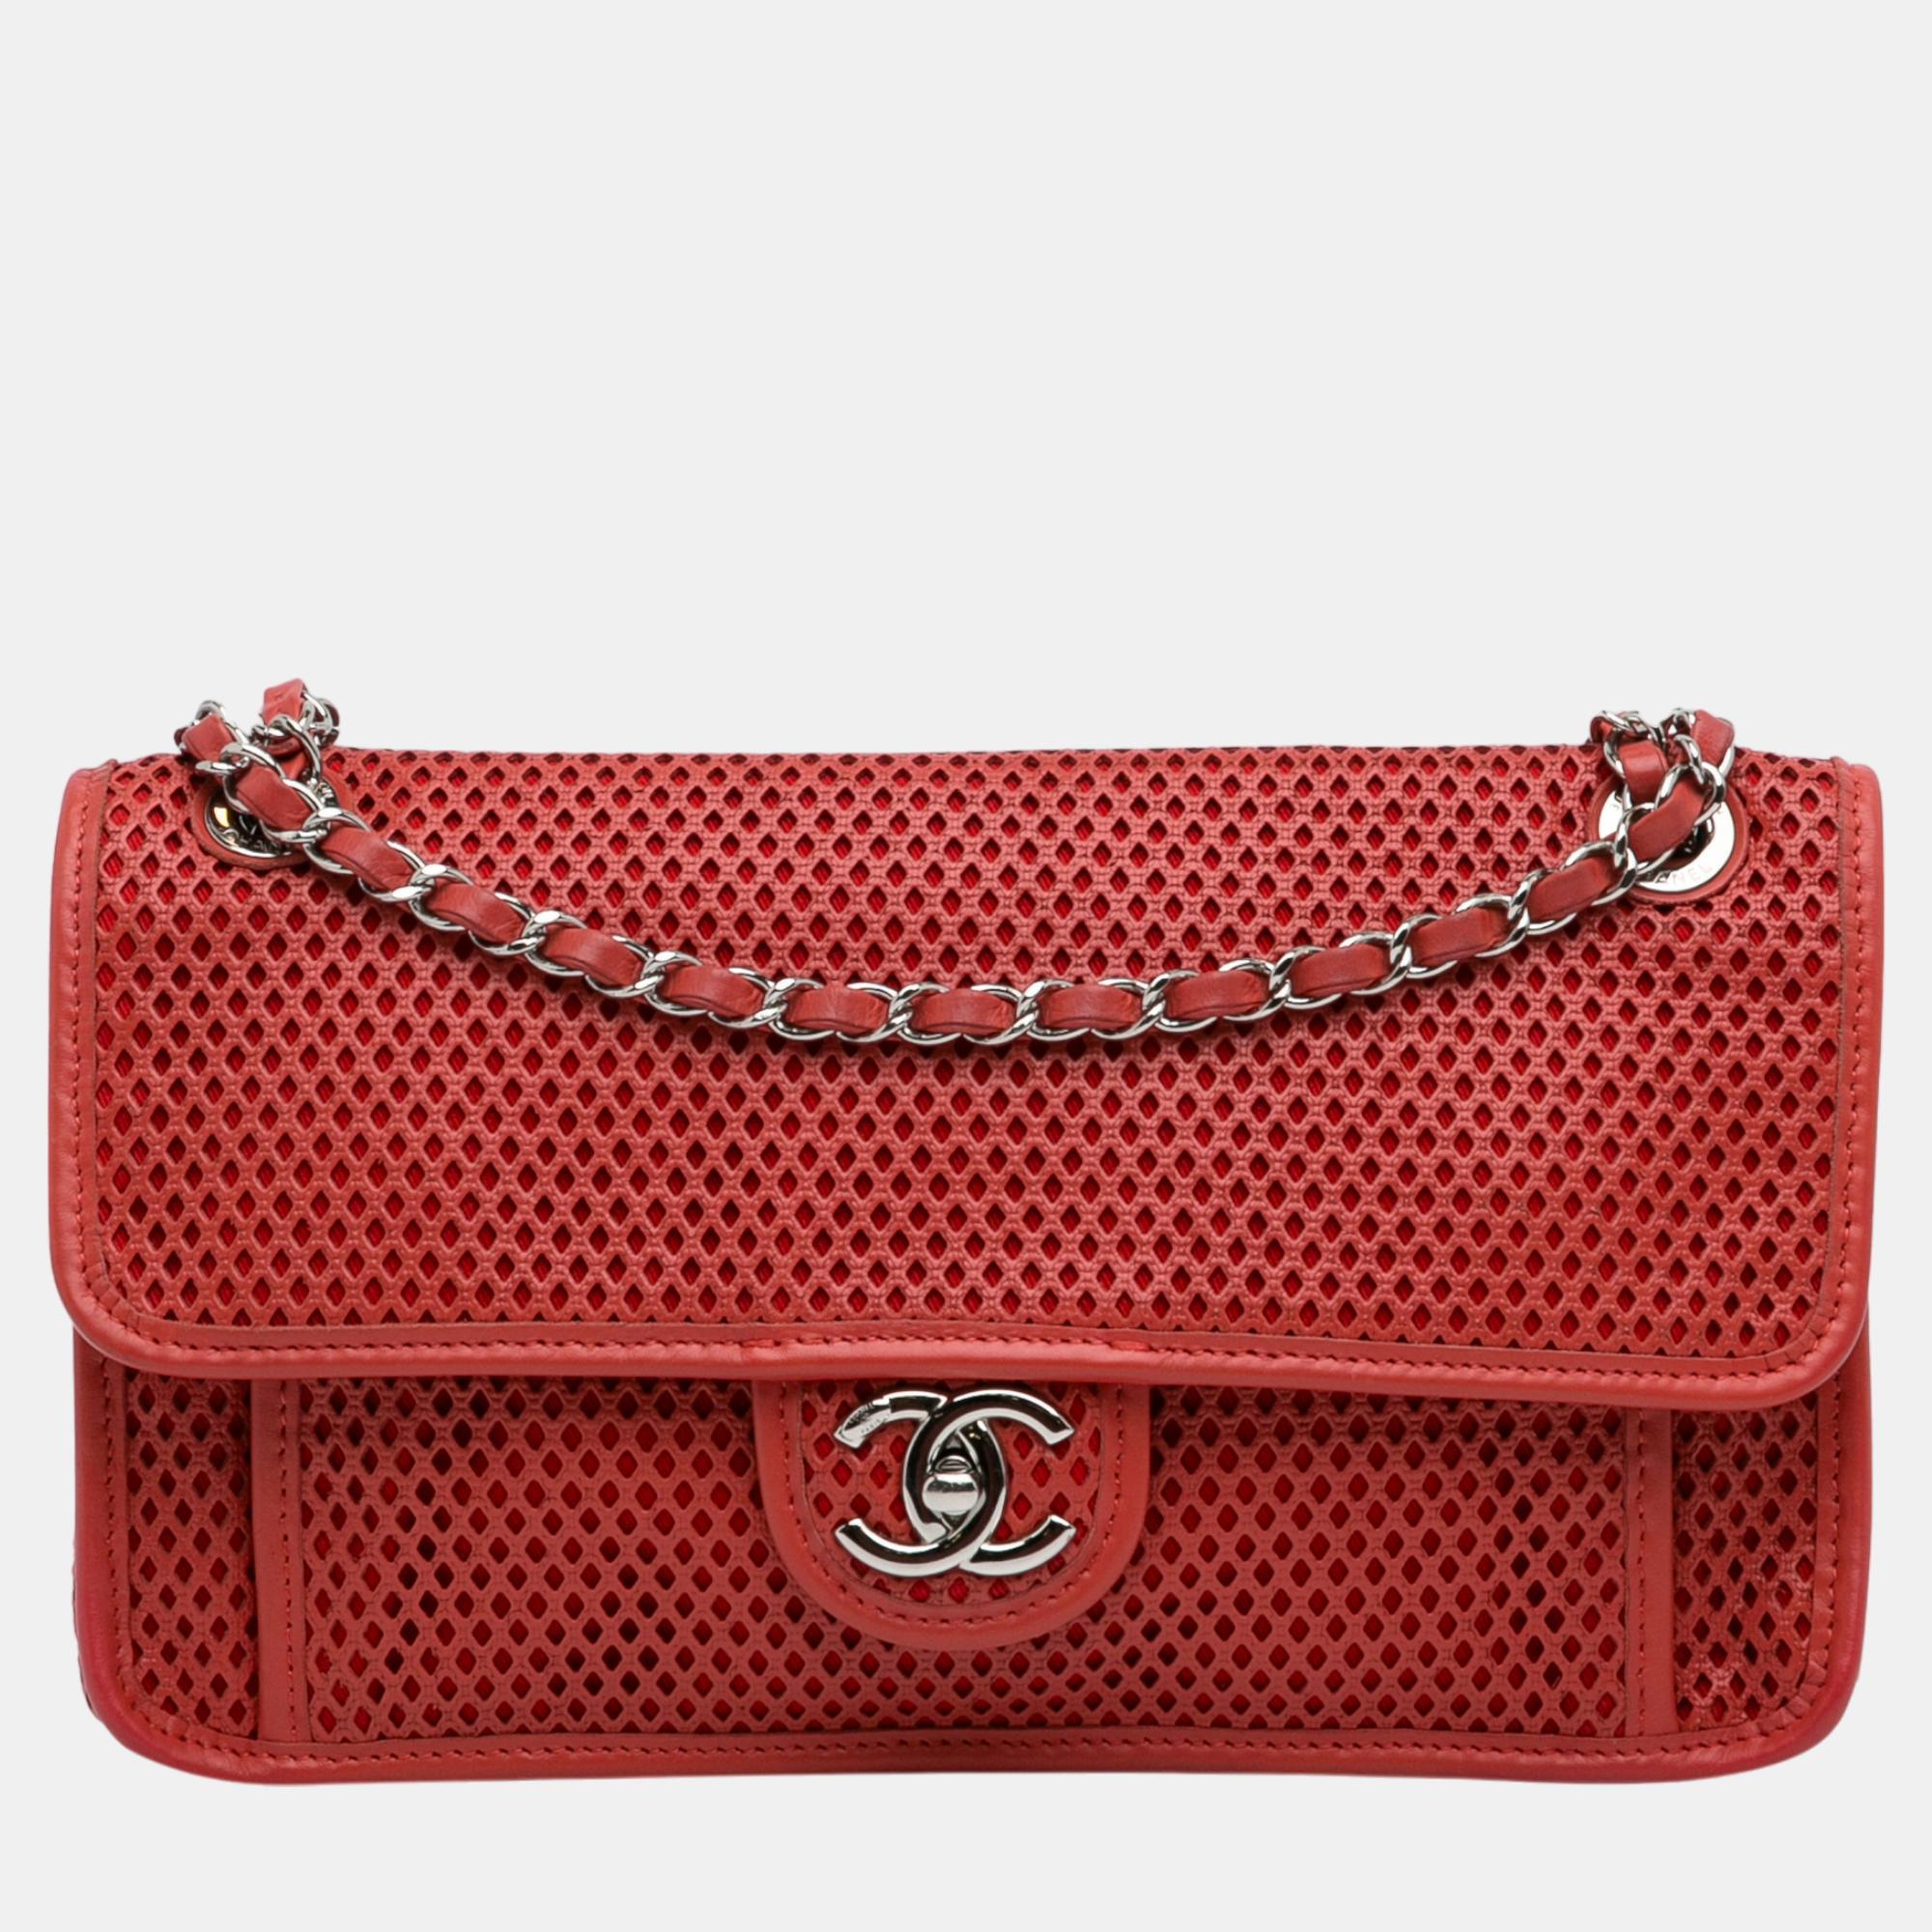 Chanel red medium up in the air flap